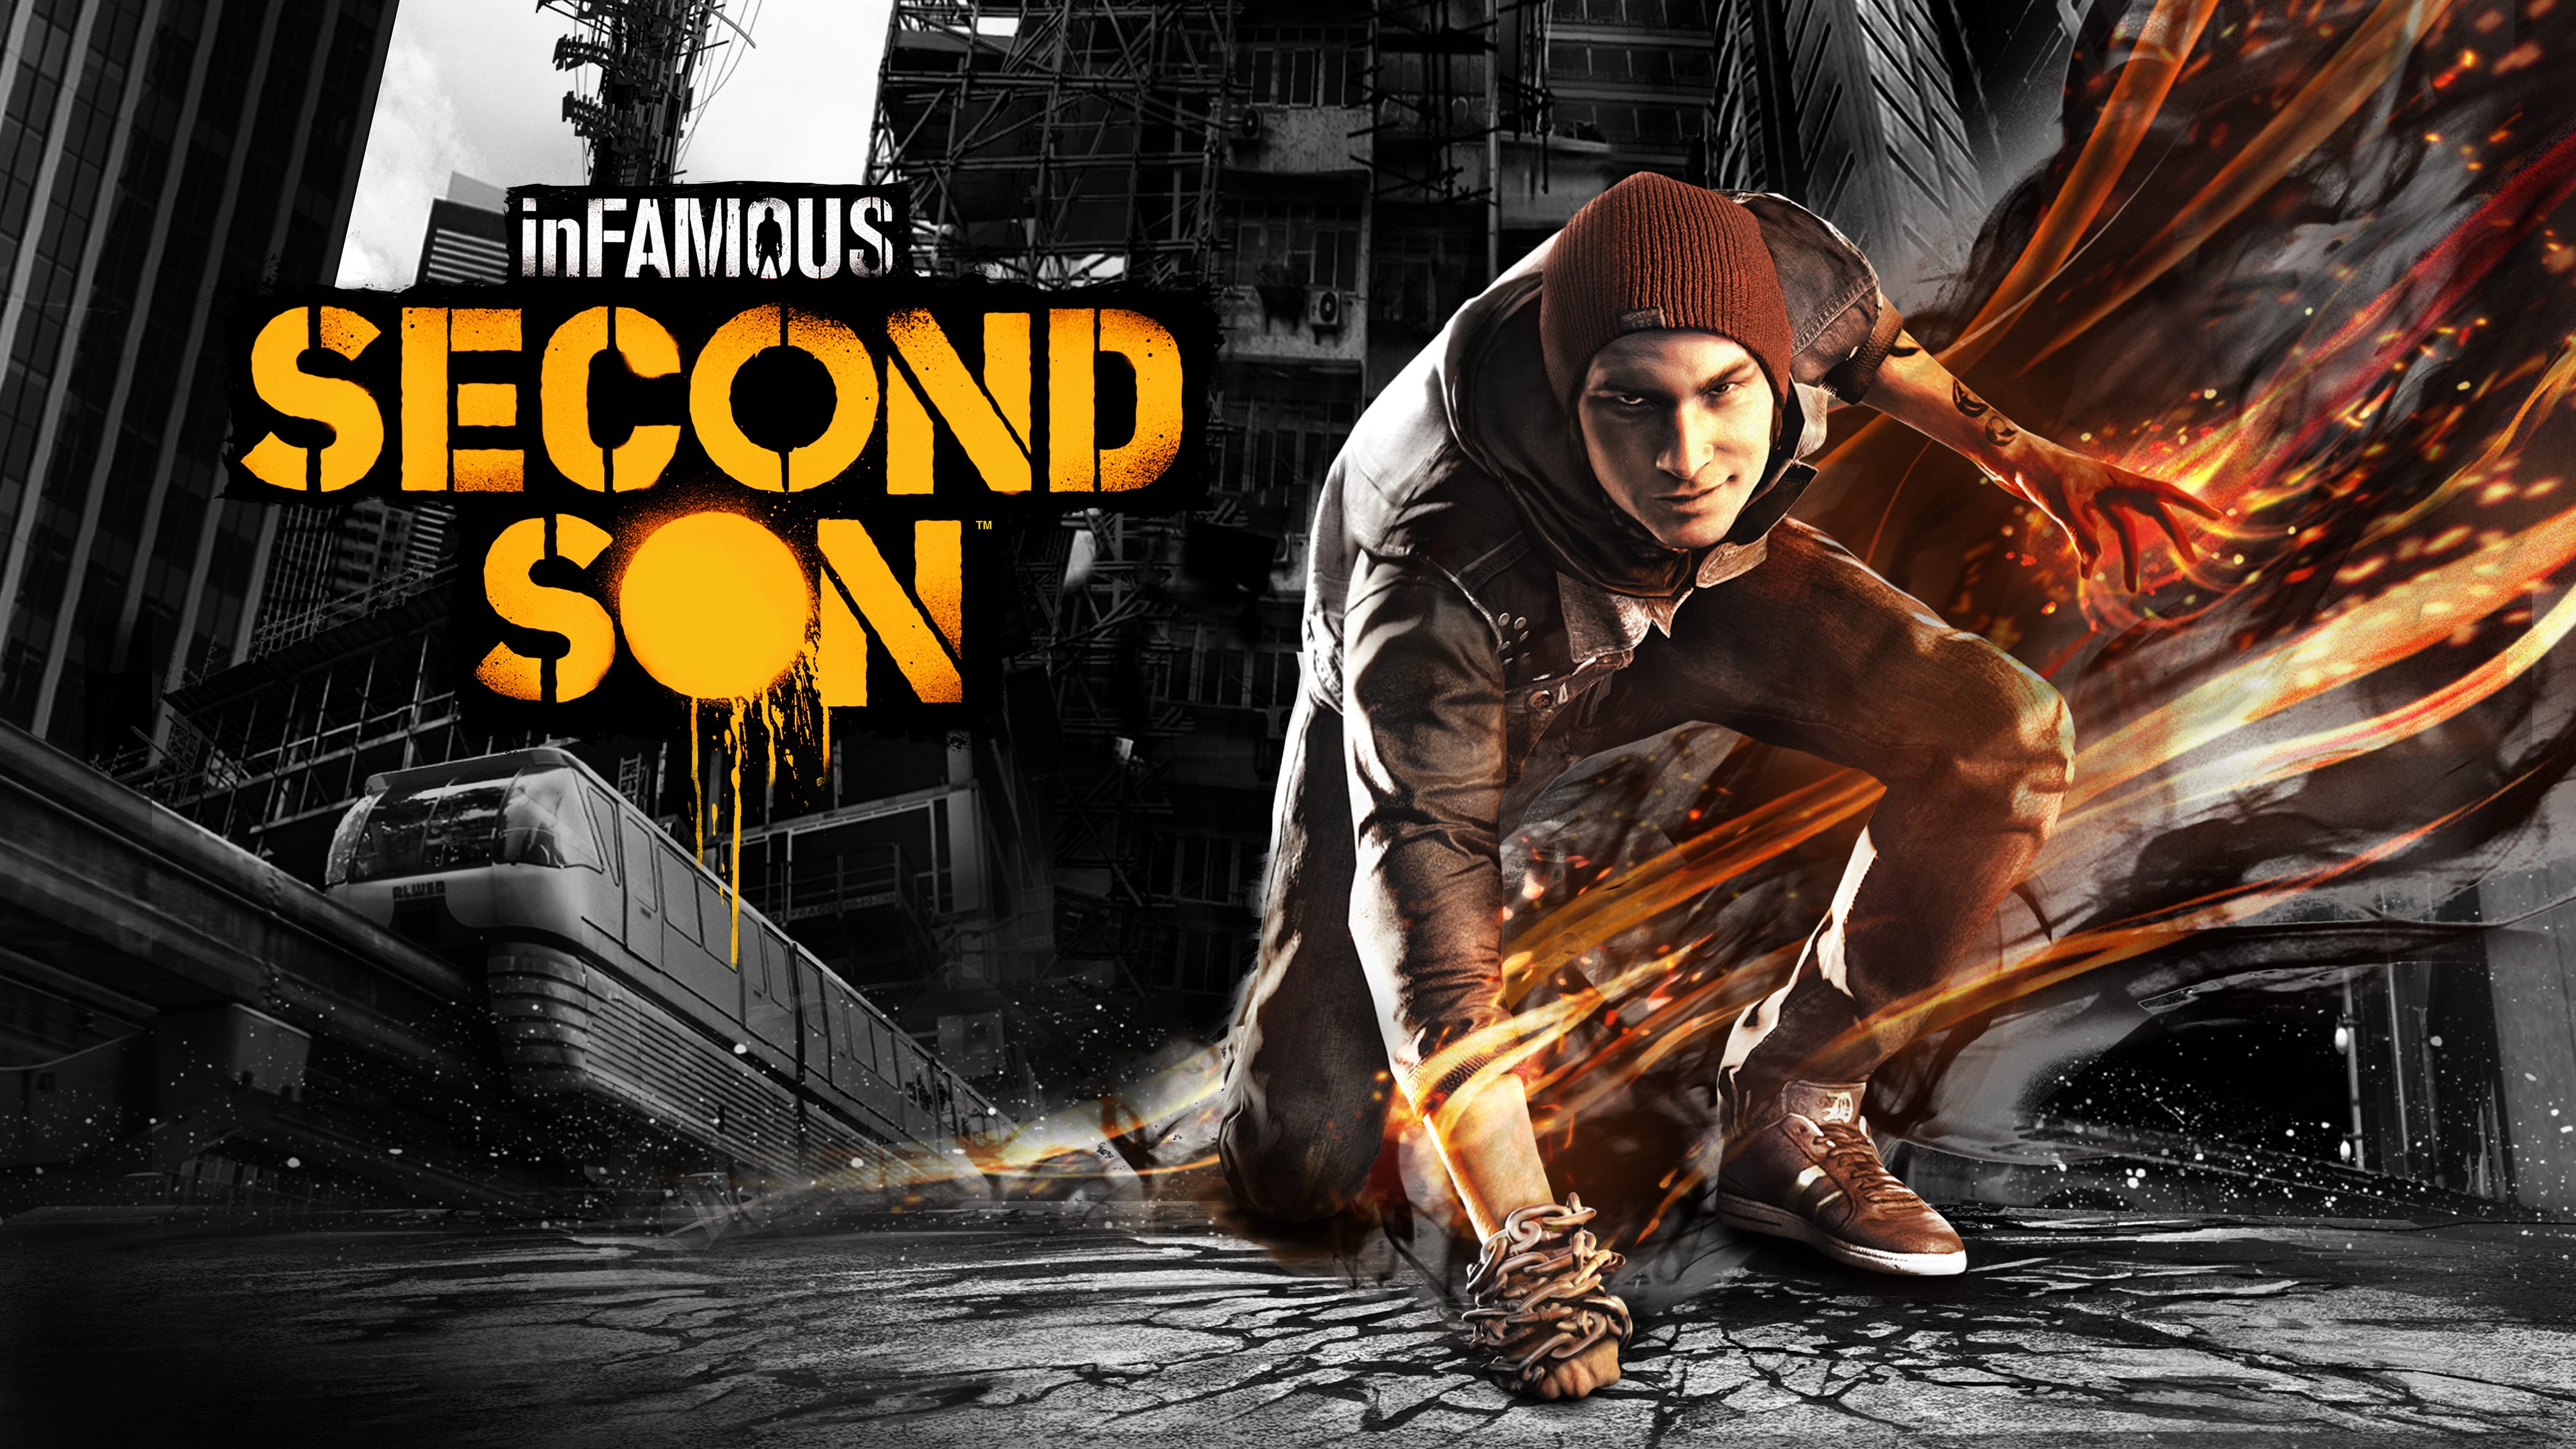 Infamous second son pc download free feetfinder app download